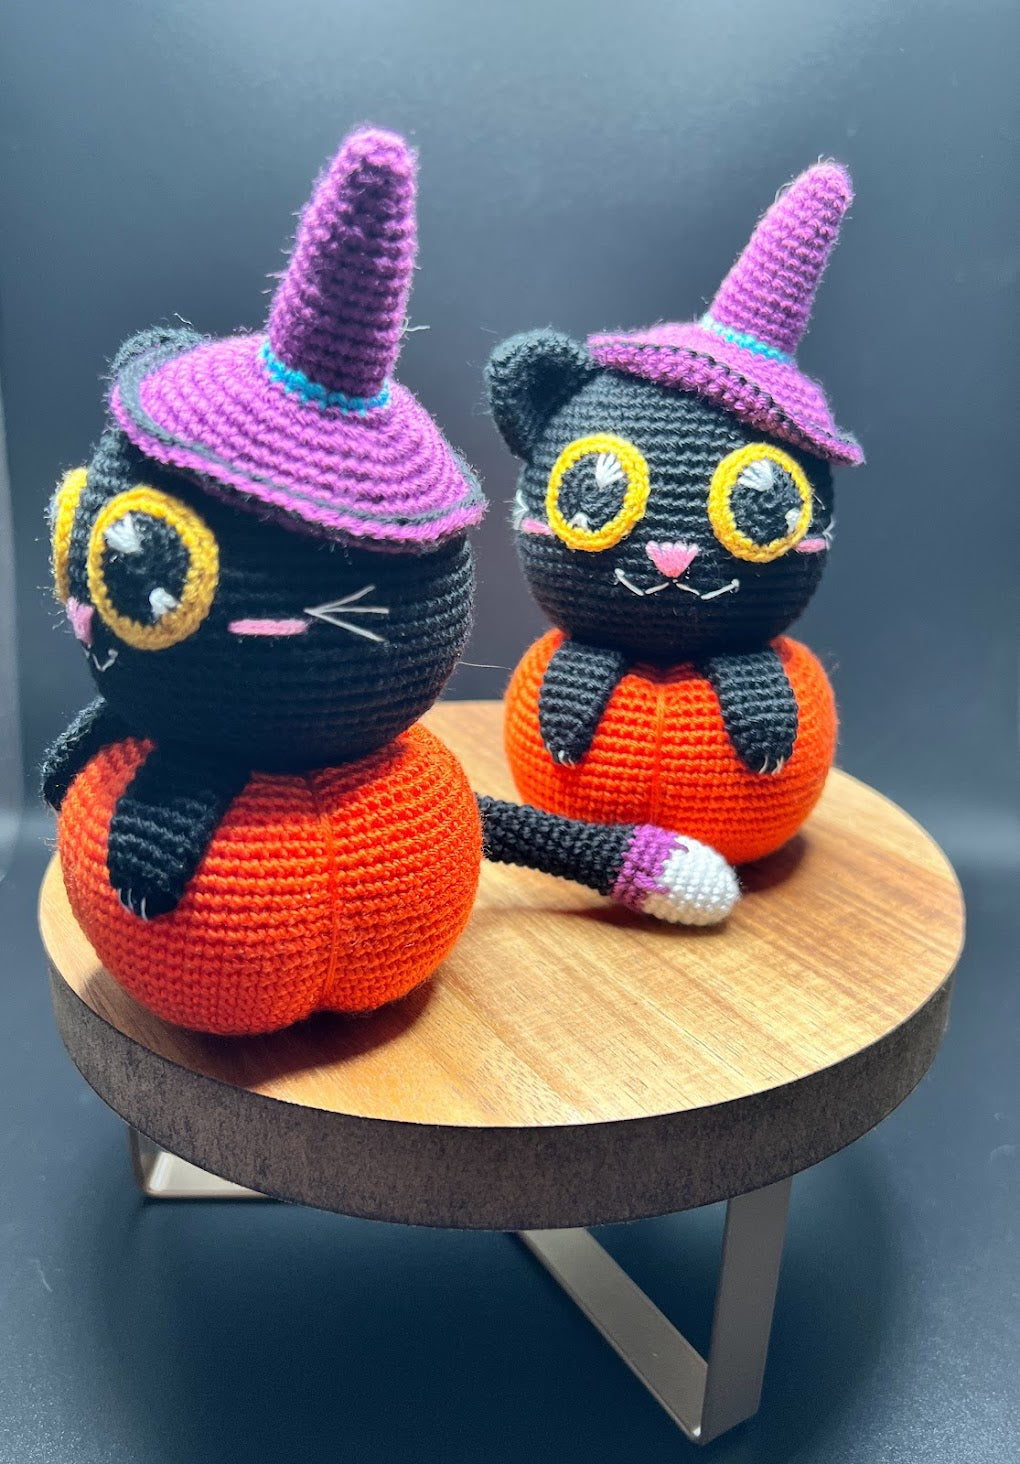 Stuffed Witch Cat Toy Over Pumpkin - Crochet Knitted Amigurumi Toy